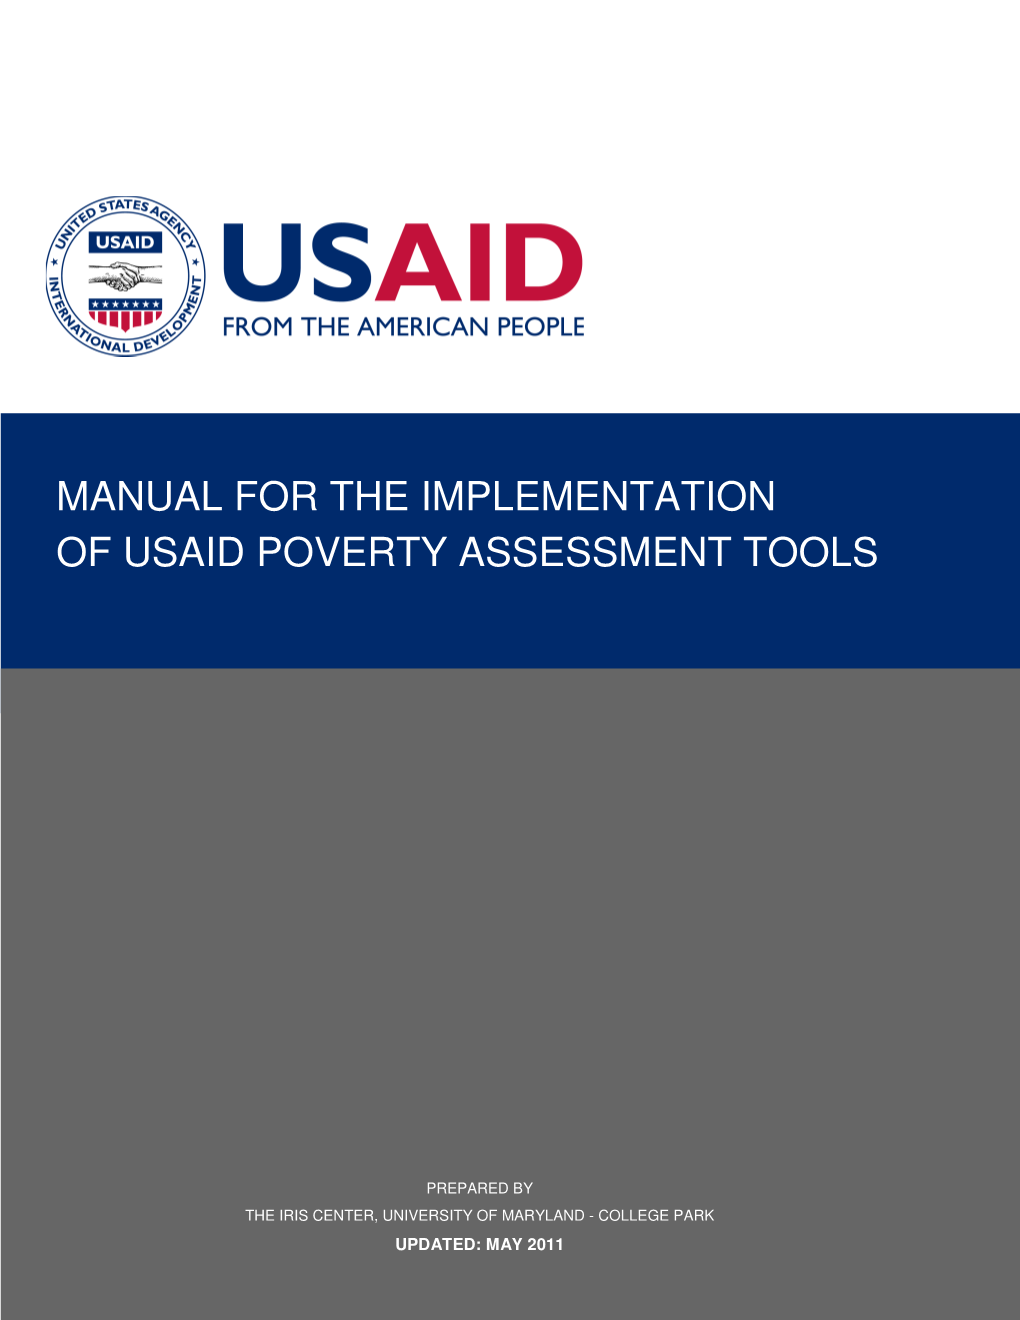 Manual for the Implementation of Usaid Poverty Assessment Tools